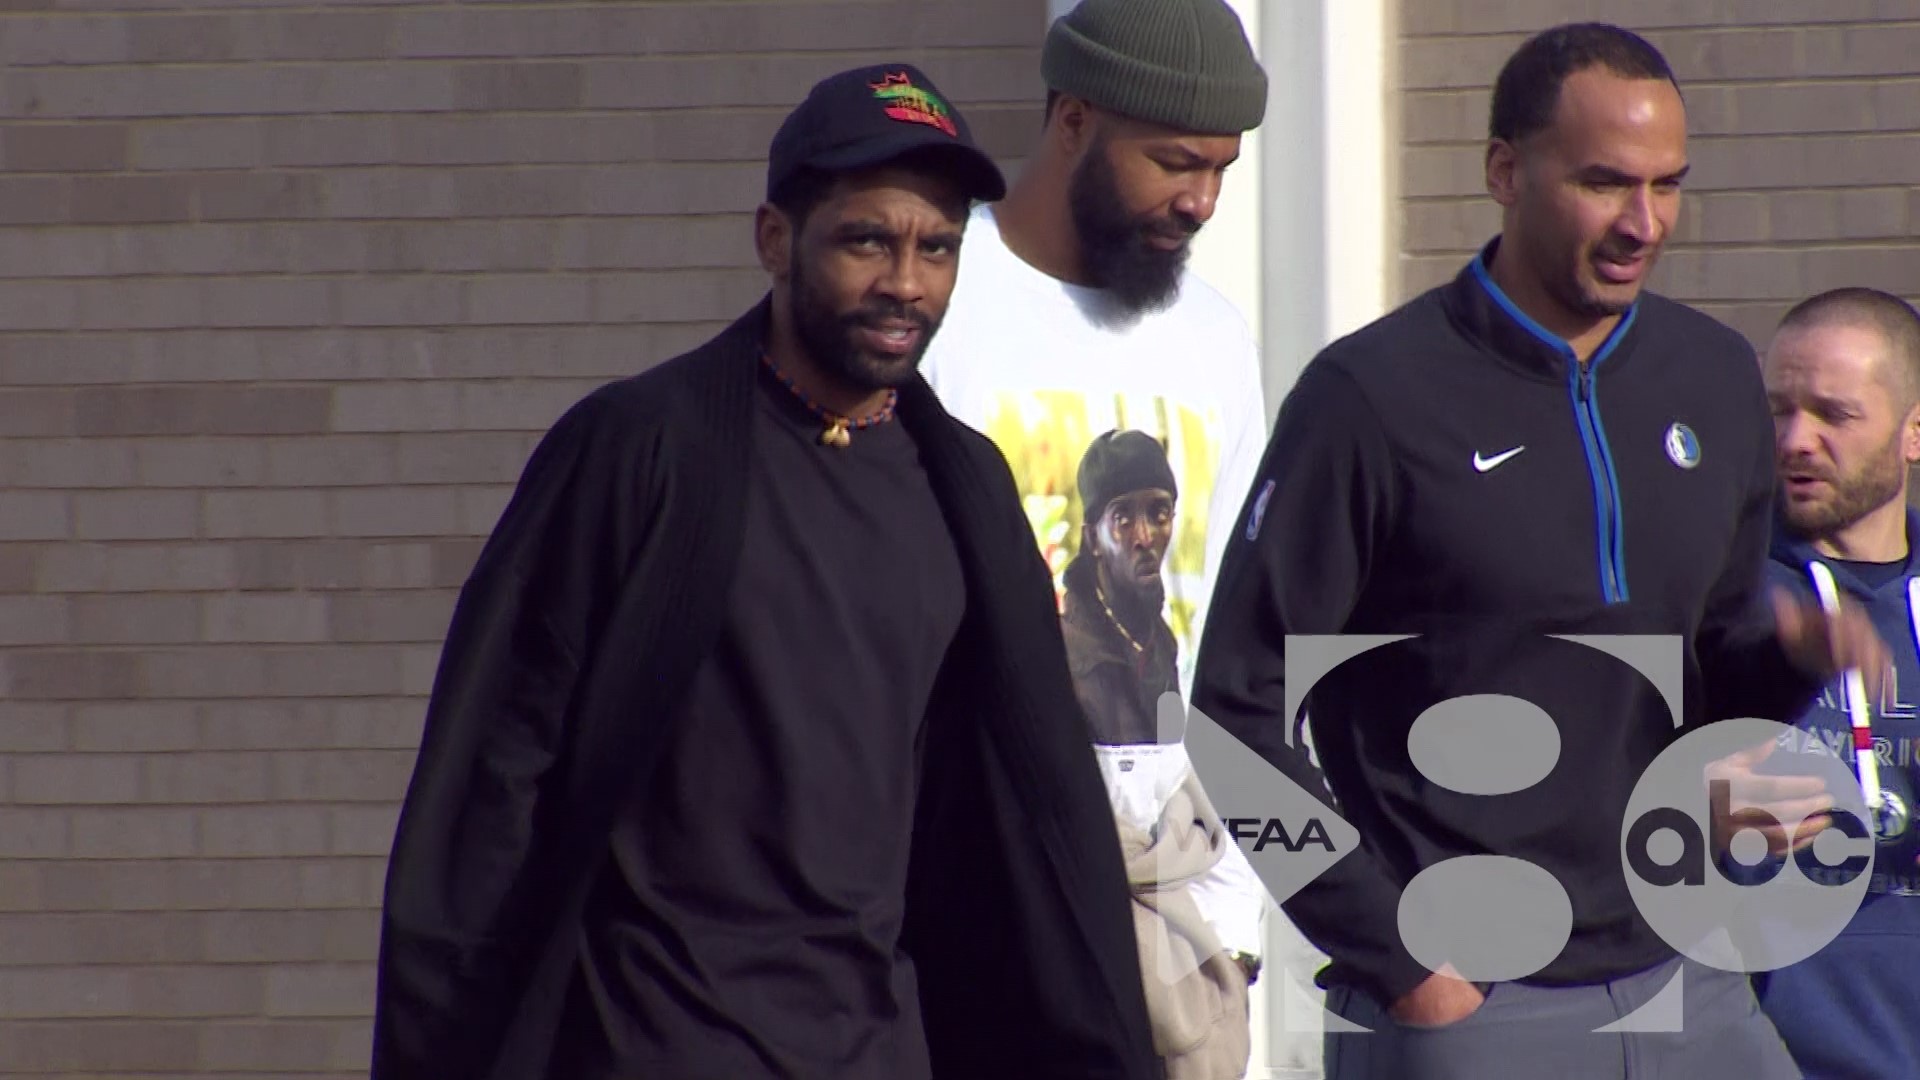 Exclusive video: Kyrie Irving arrived at the Mavs' practice facility in Dallas as the team's trade with Brooklyn became official.